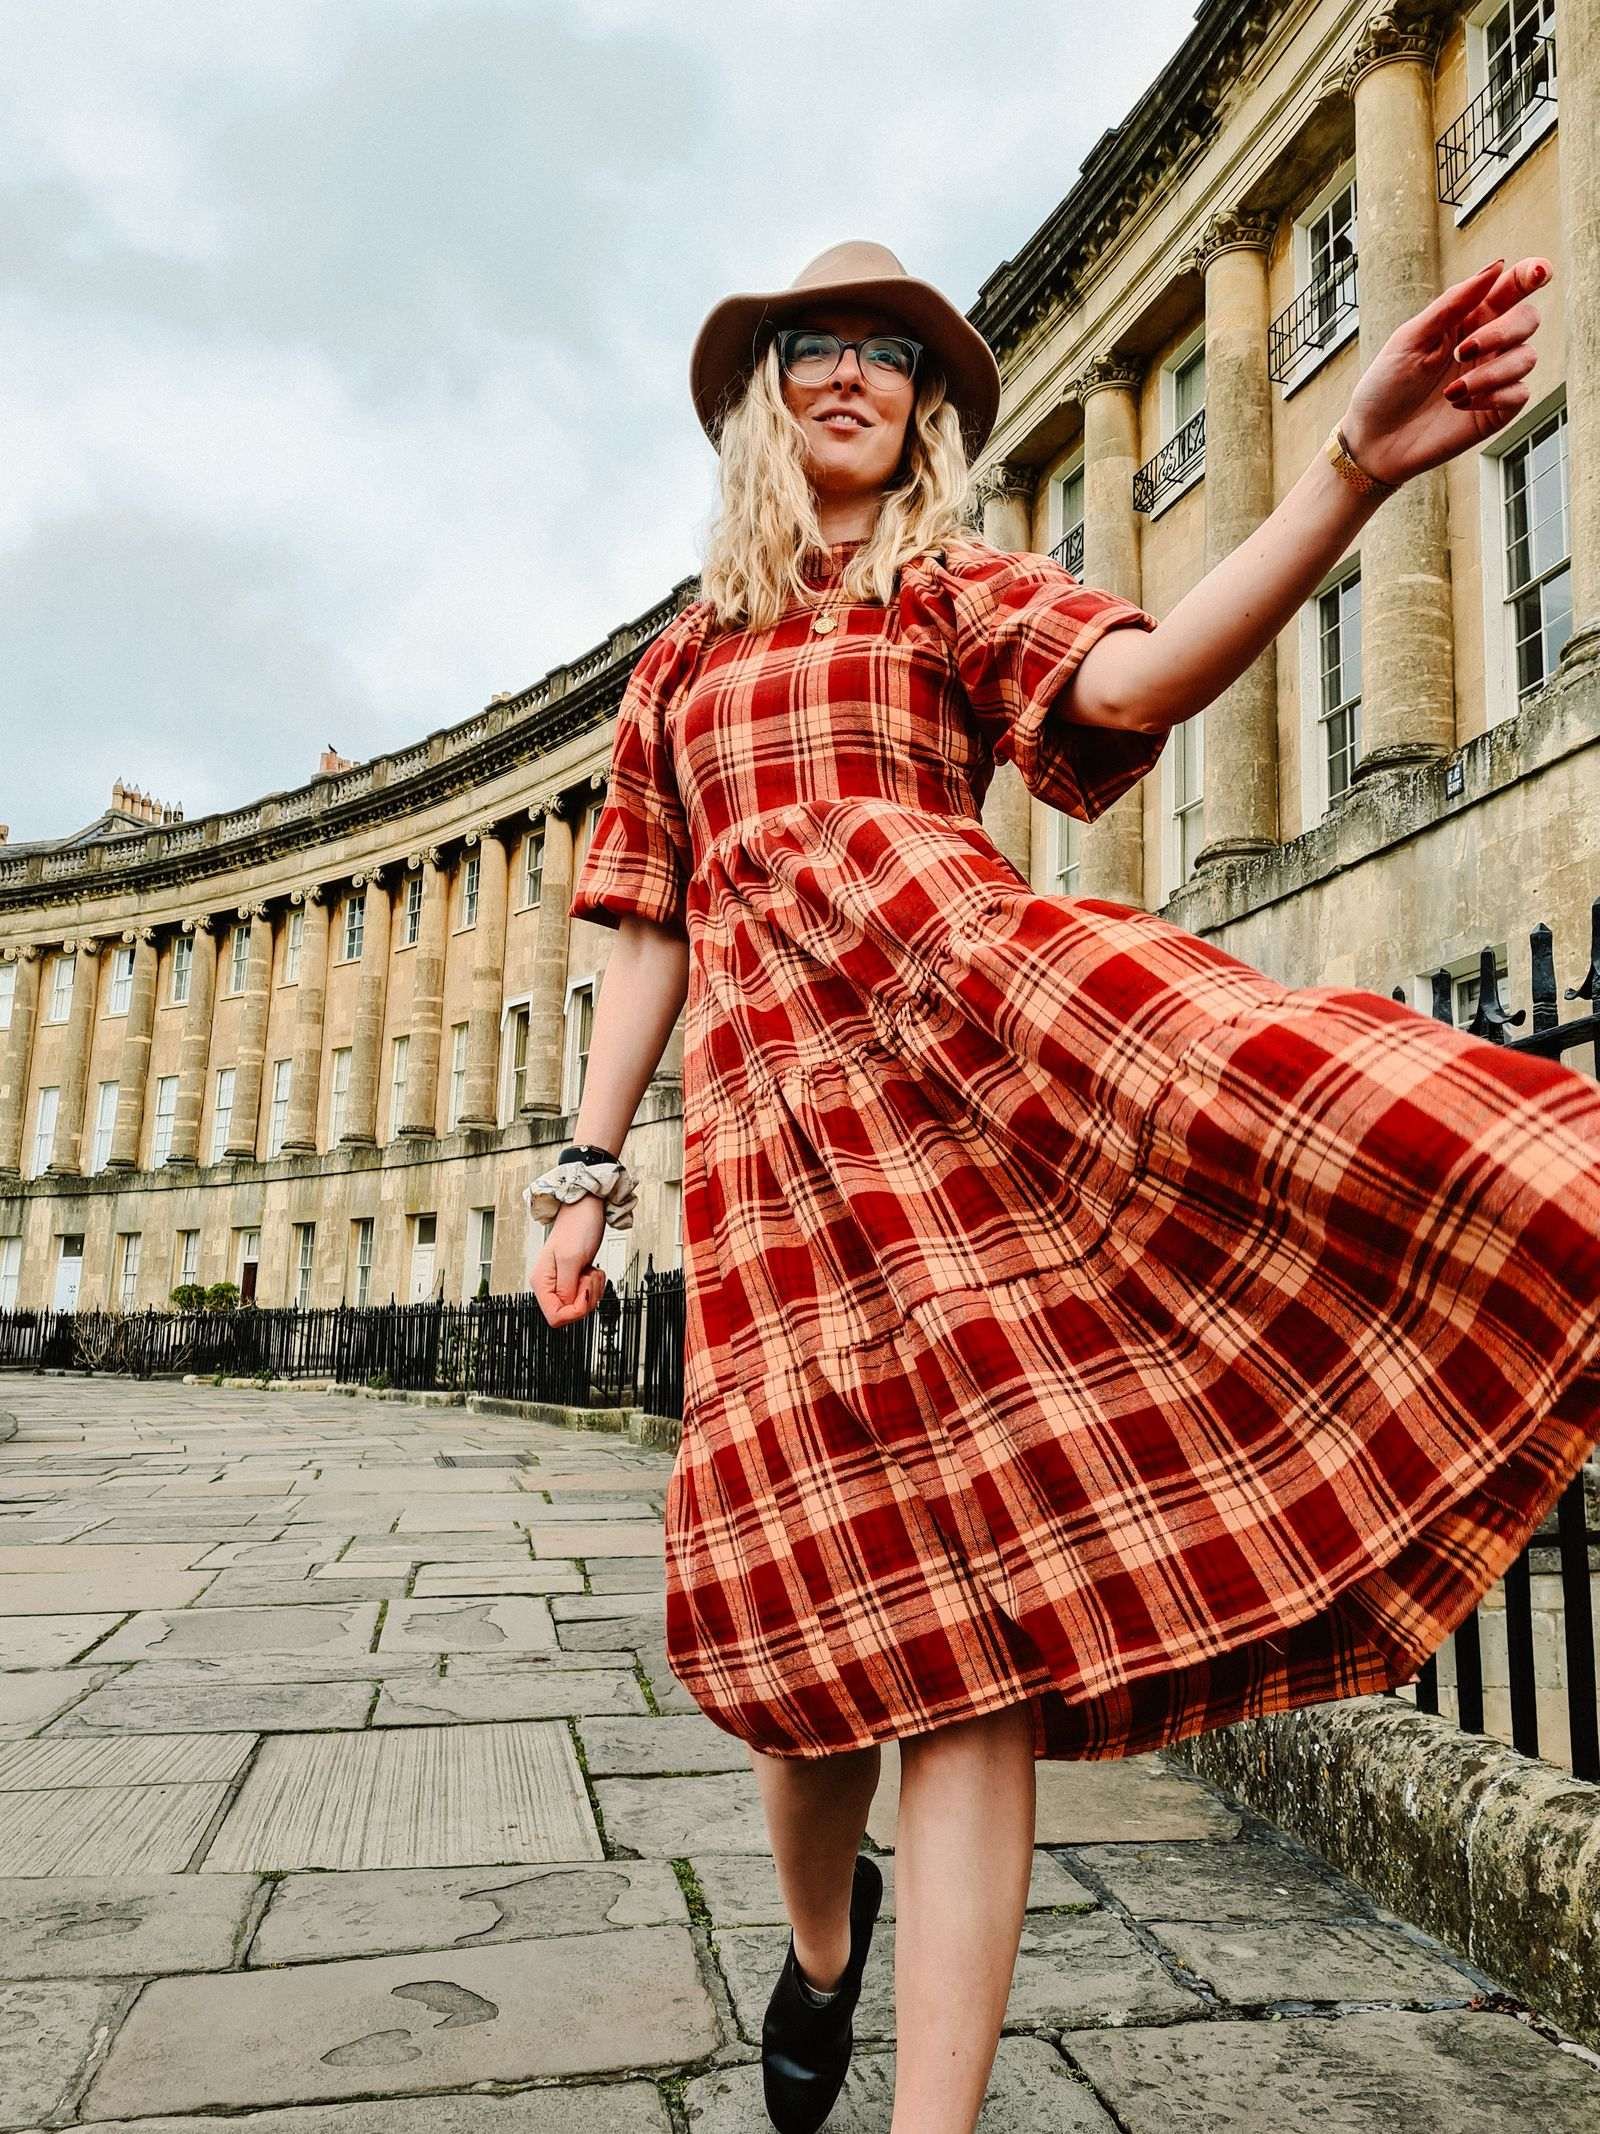 Girl in red dress flicking skirt in Bath's Royal Crescent